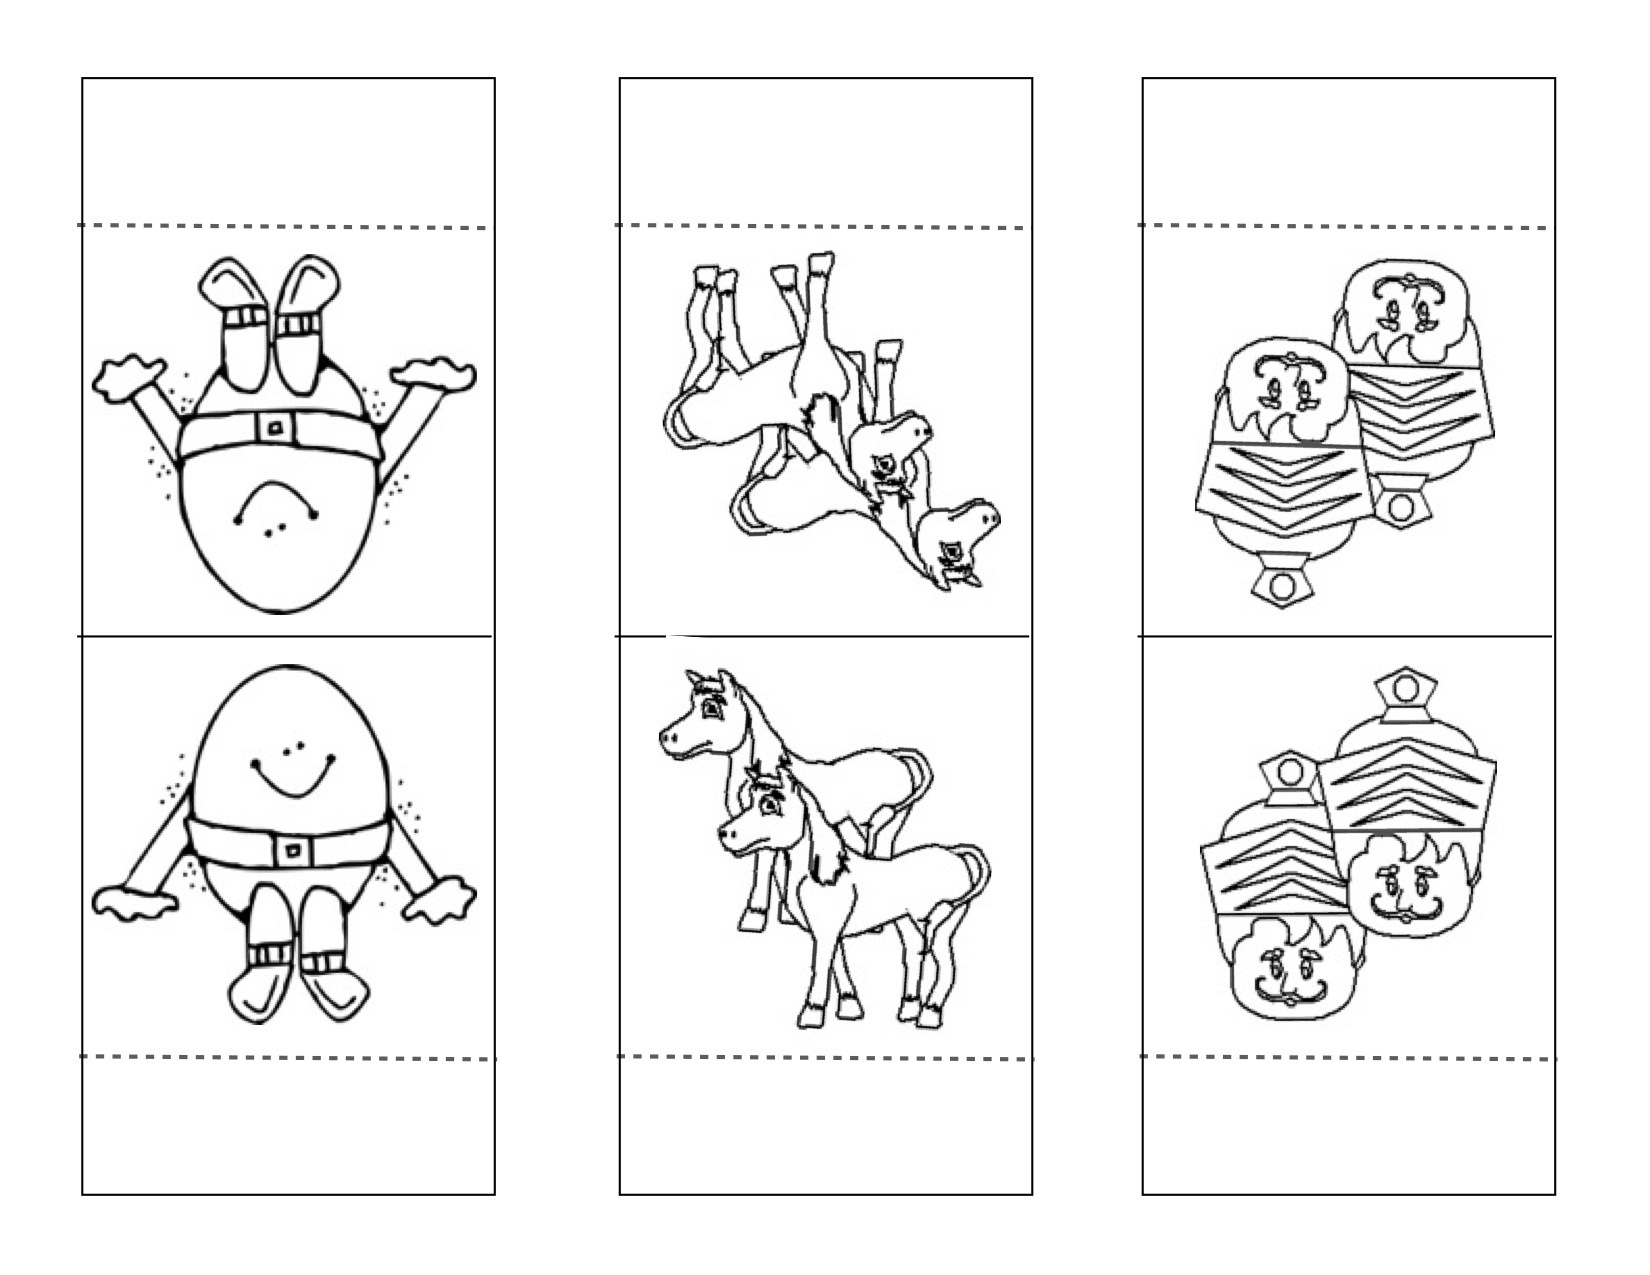 4 Best Images of Humpty Dumpty Sequencing Printable - Humpty Dumpty